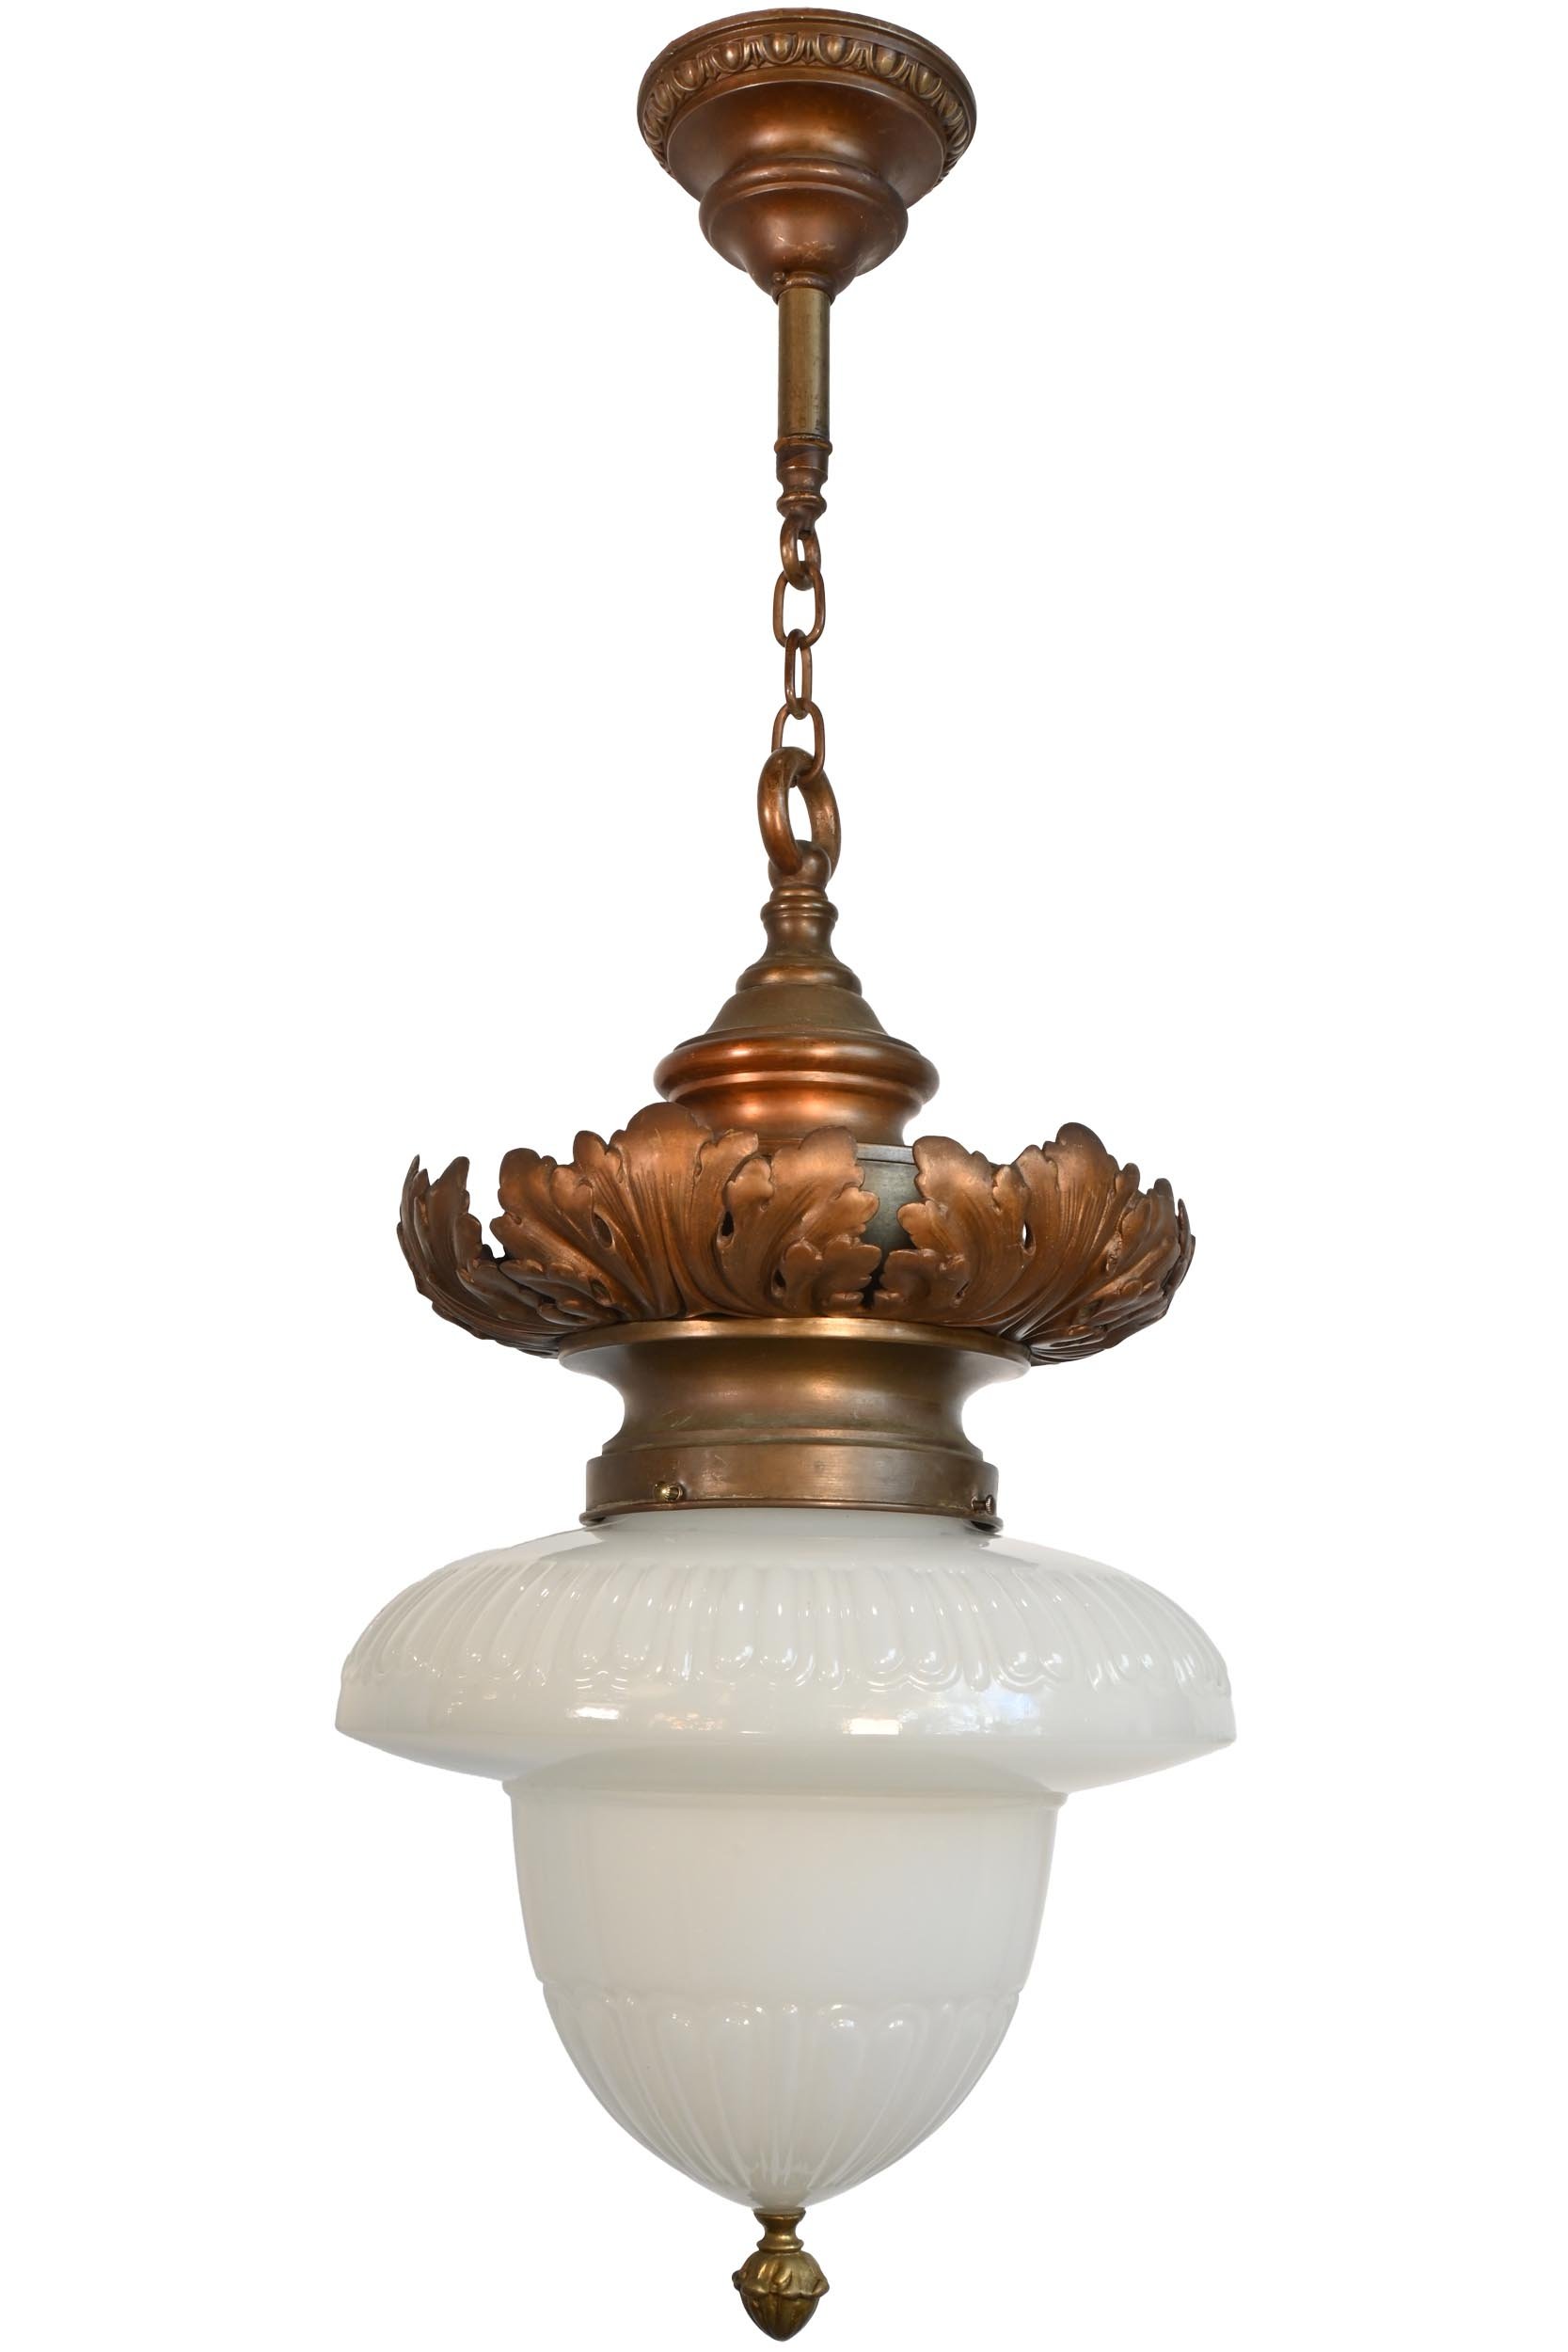 cast bronze neoclassical pendant with milk glass shade